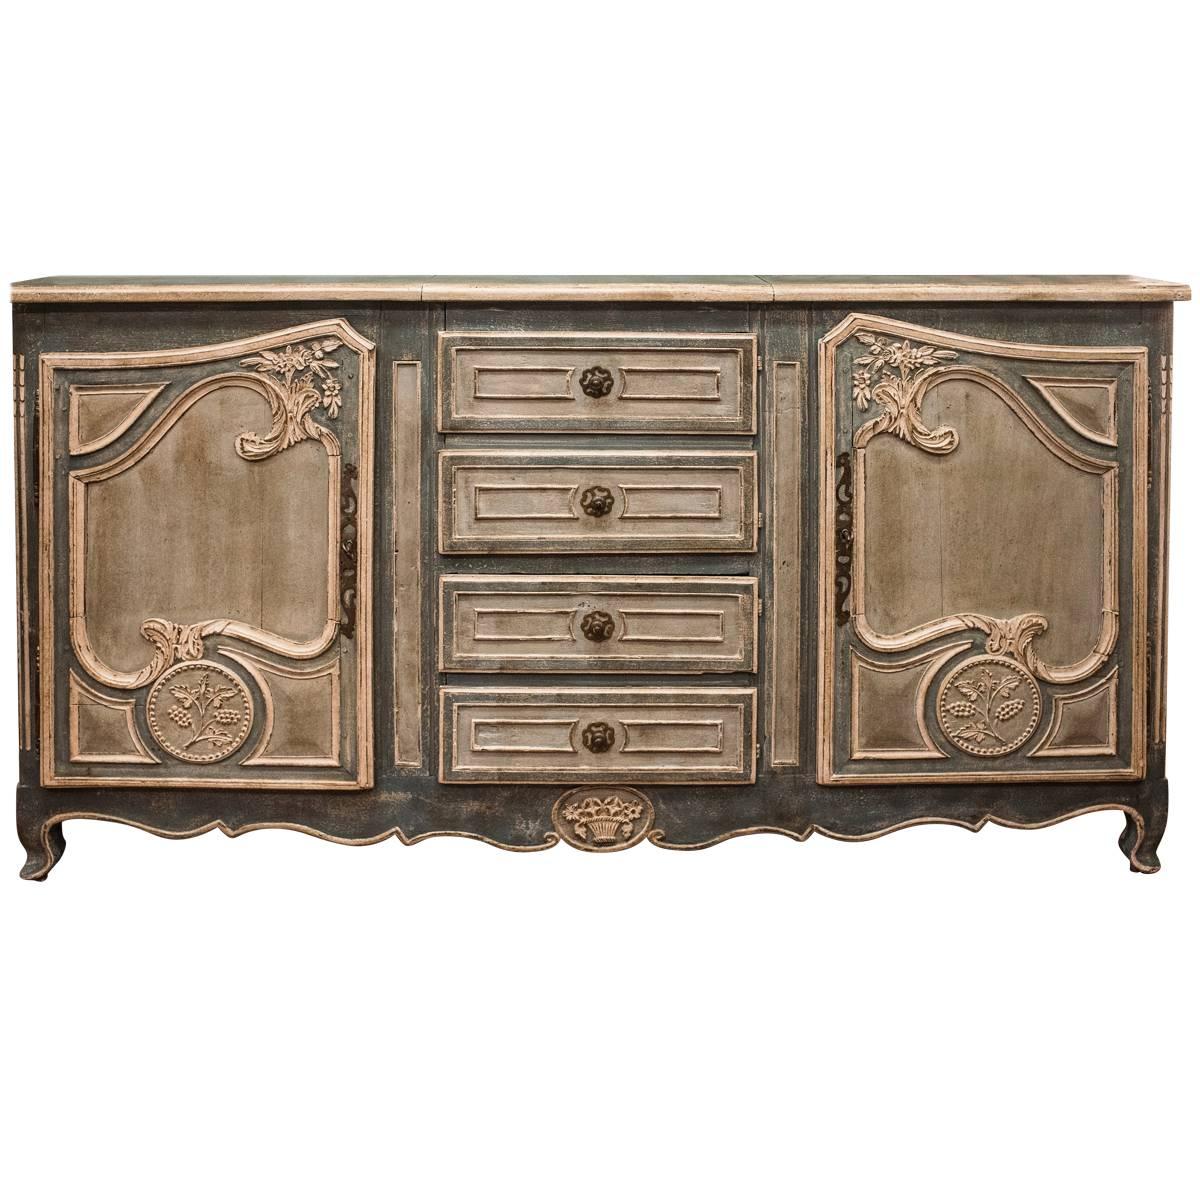 19th Century Provencal French Blue and Grey Buffet, circa 1860